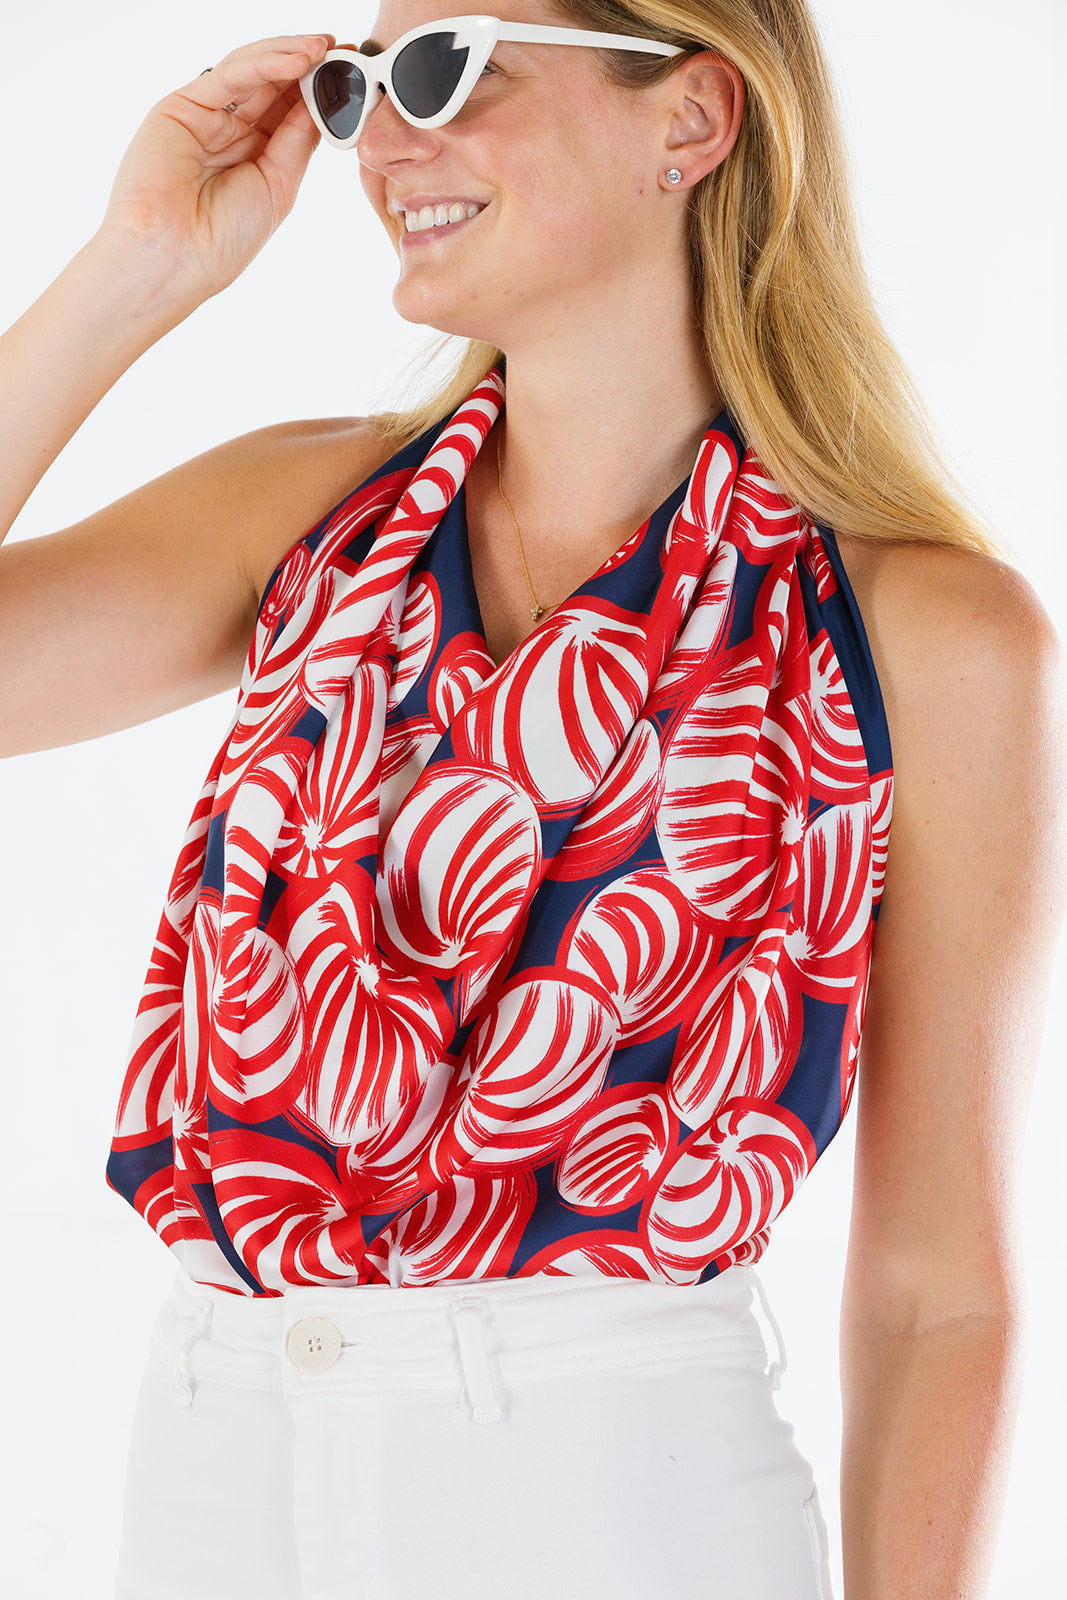 Navy + Red Gameday Scarf